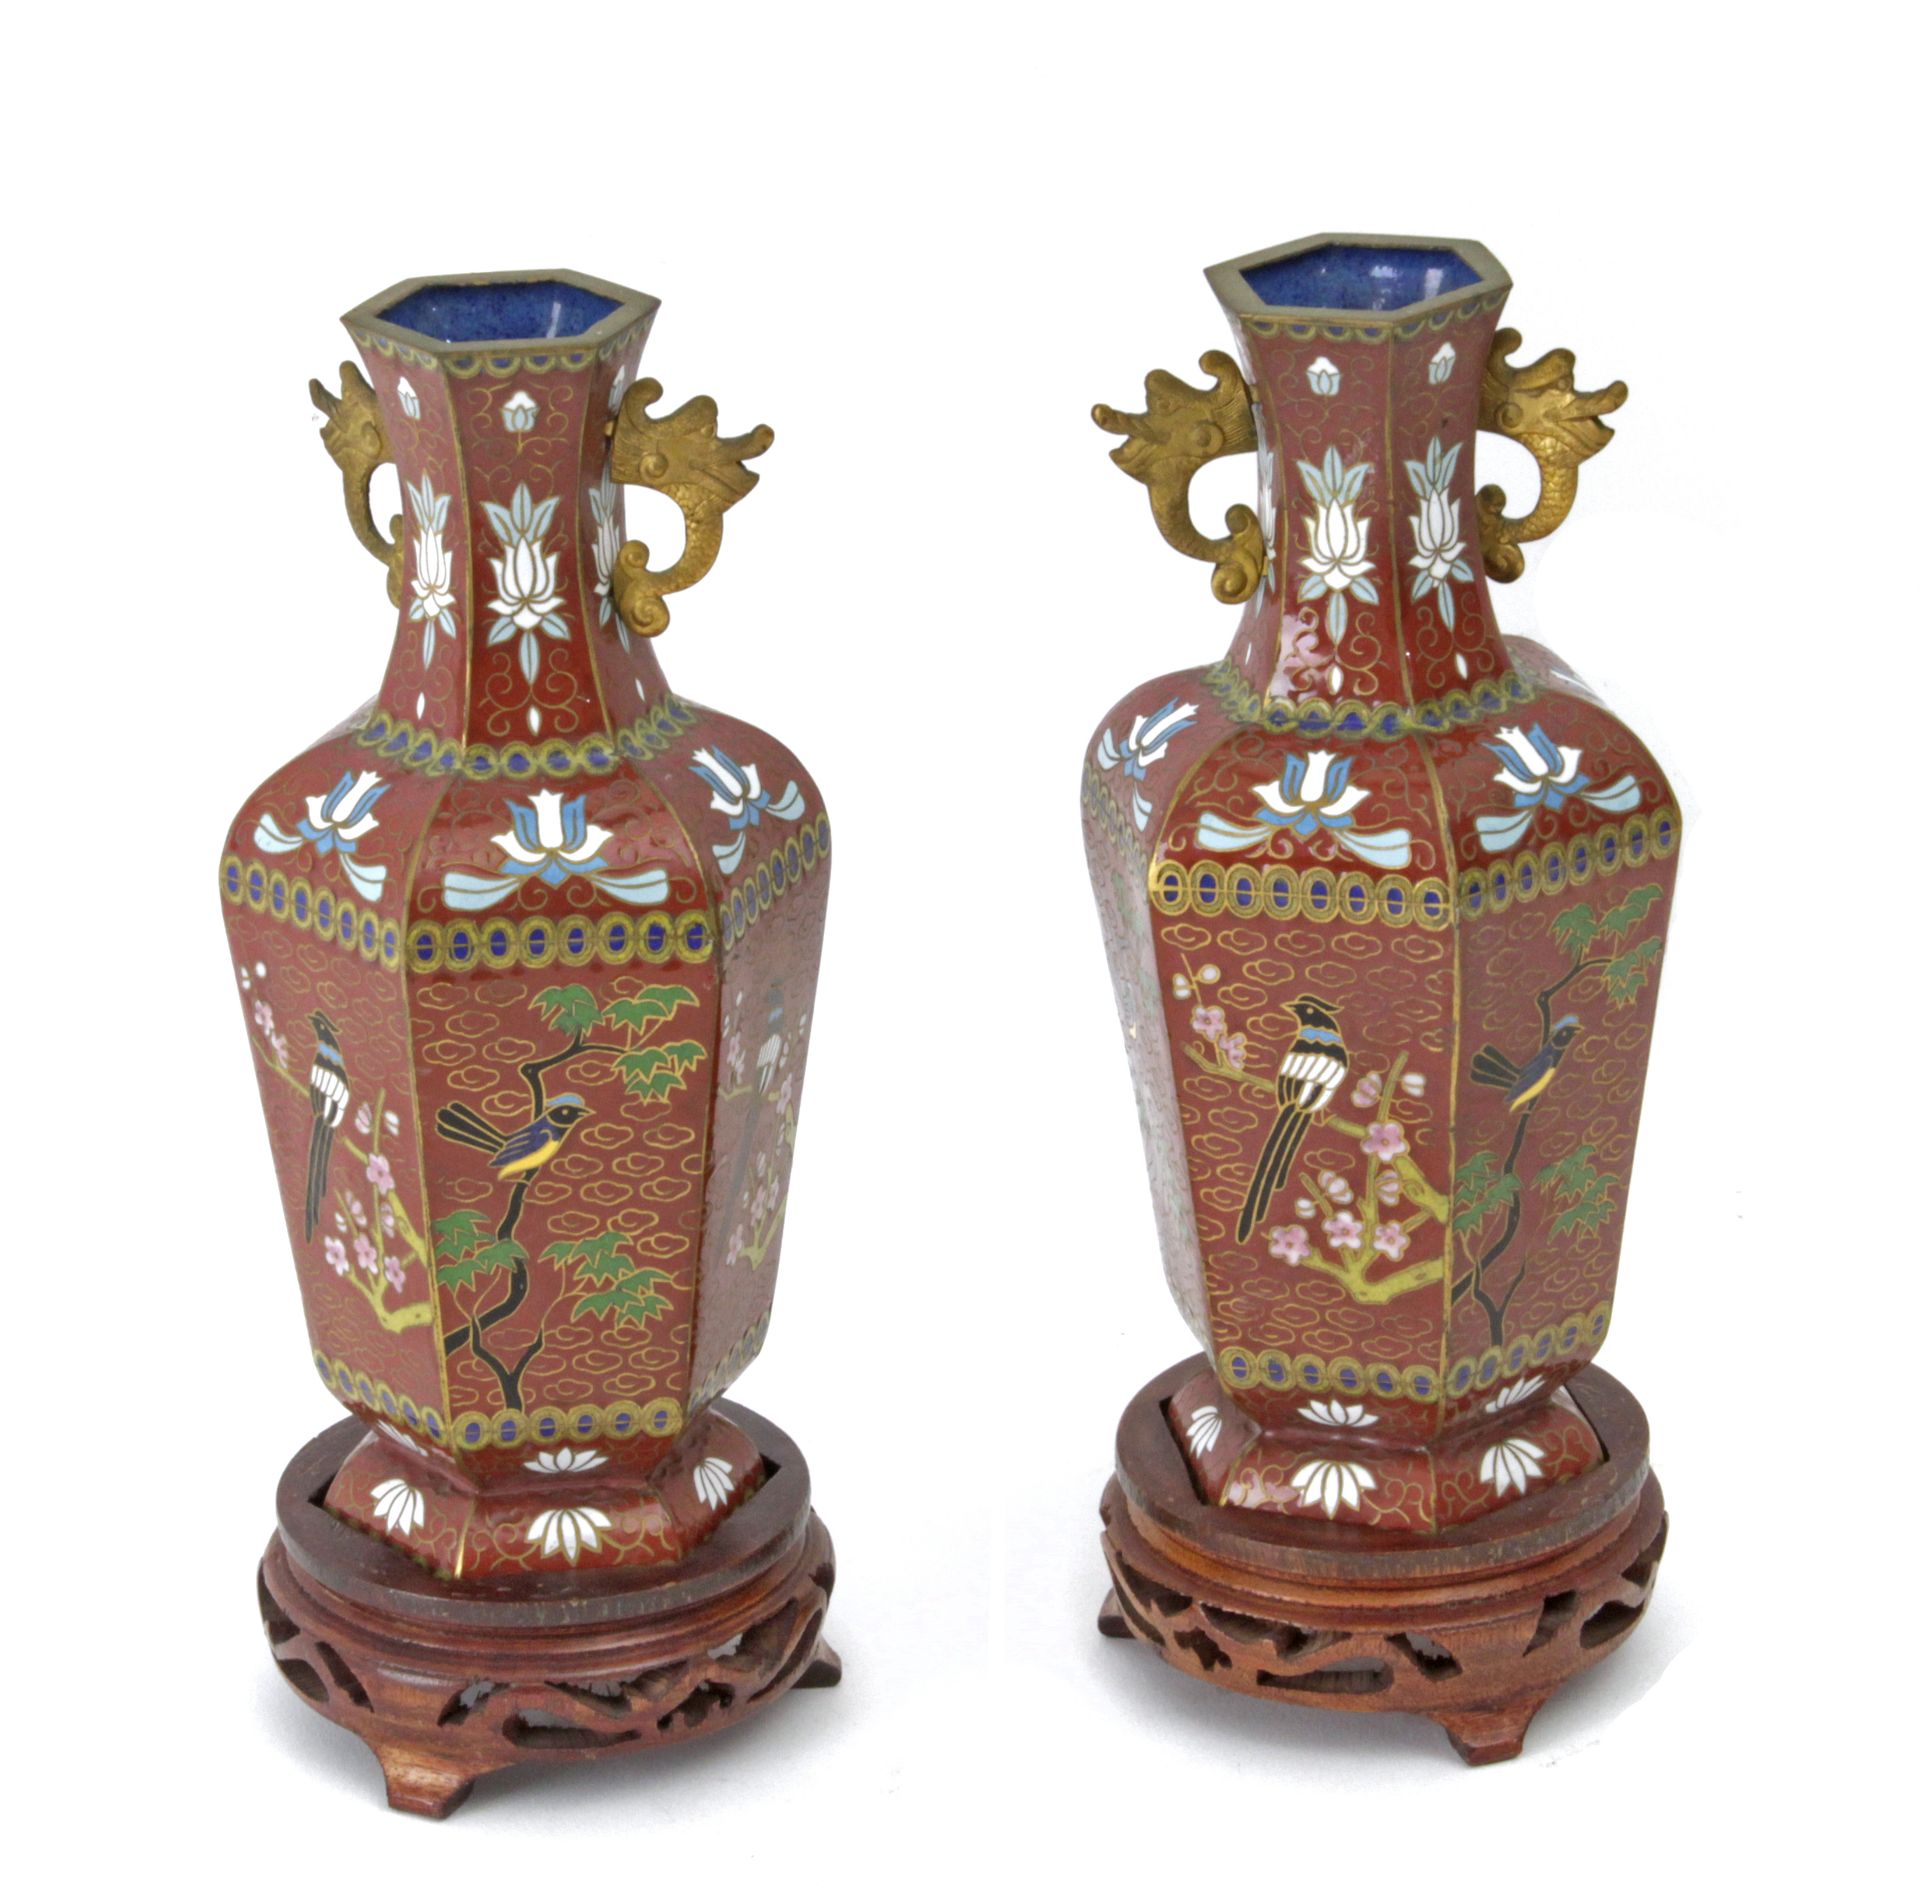 A pair of 20th century Chinese vases in bronze with cloisonné enamel - Image 2 of 5